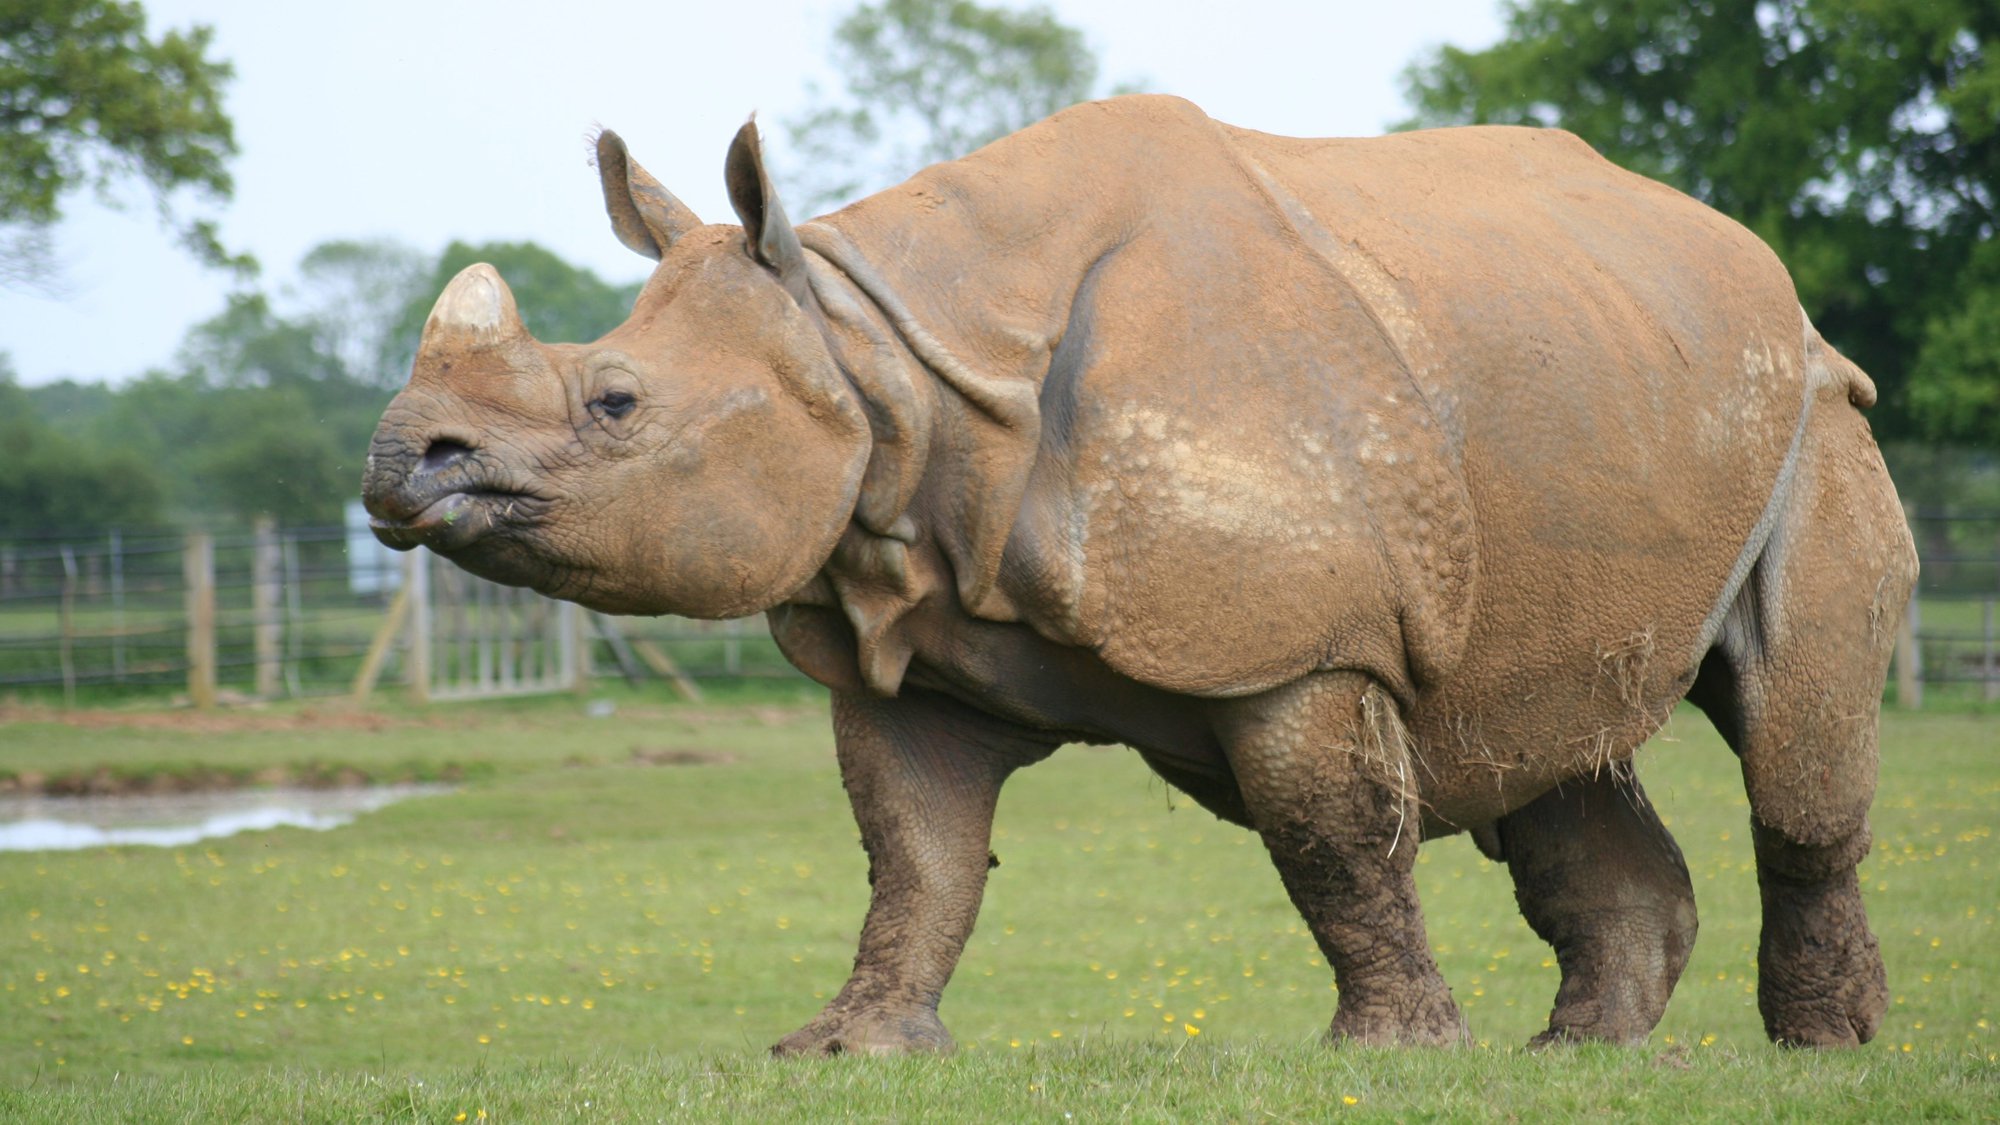 Greater one-horned rhino facts | Zoological Society of London (ZSL)